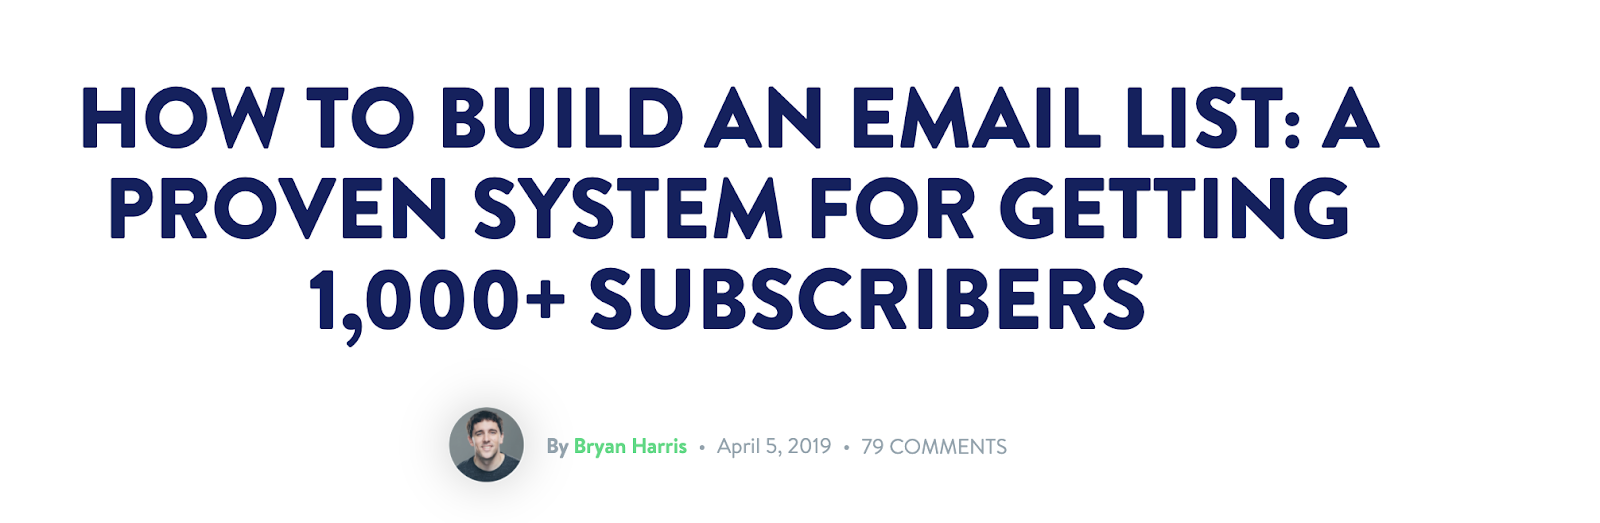 How to Build an Email List: A Proven System for Getting 1,000+ Subscribers